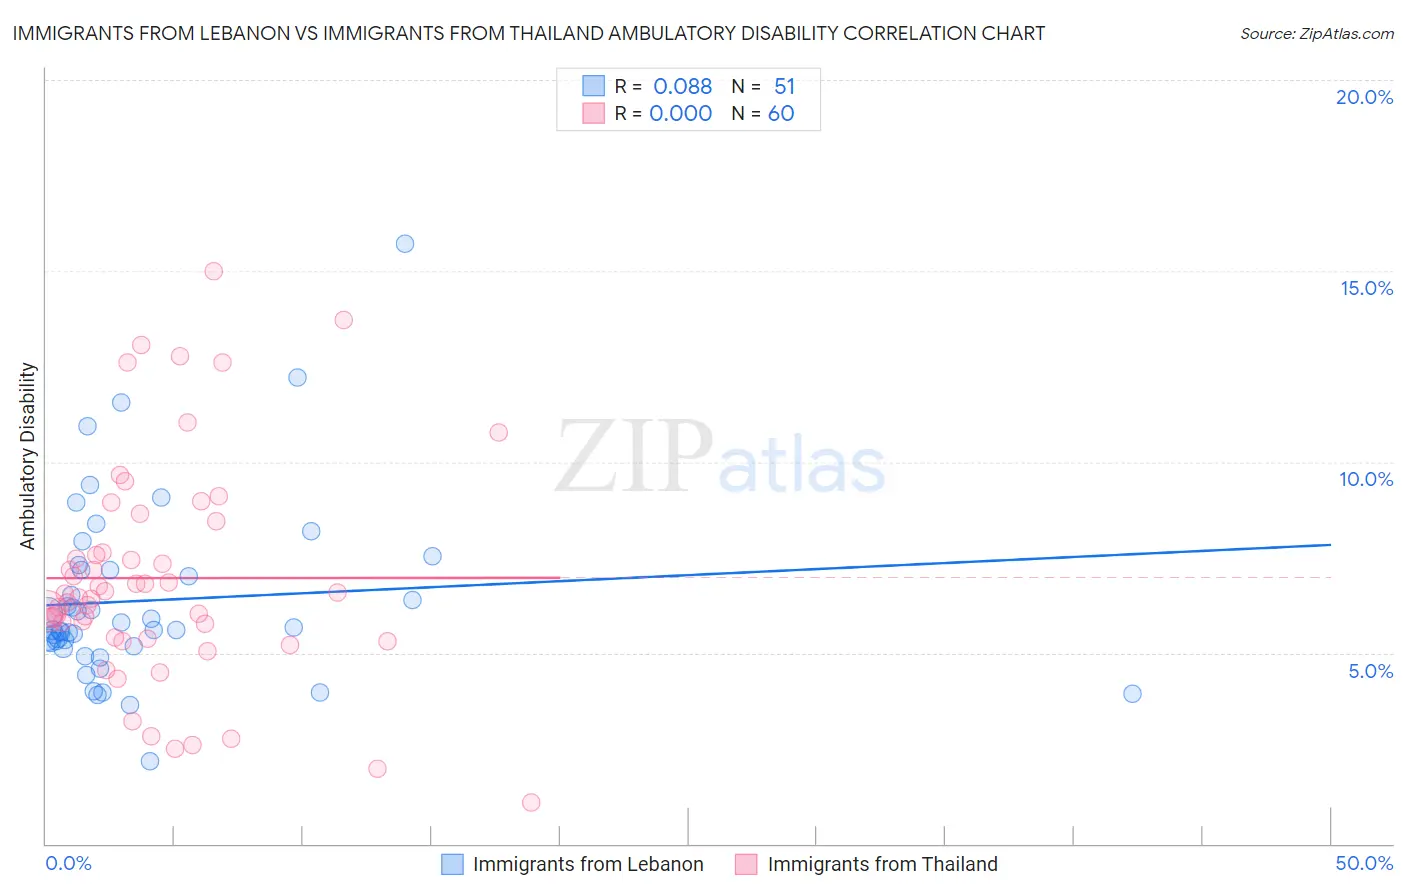 Immigrants from Lebanon vs Immigrants from Thailand Ambulatory Disability